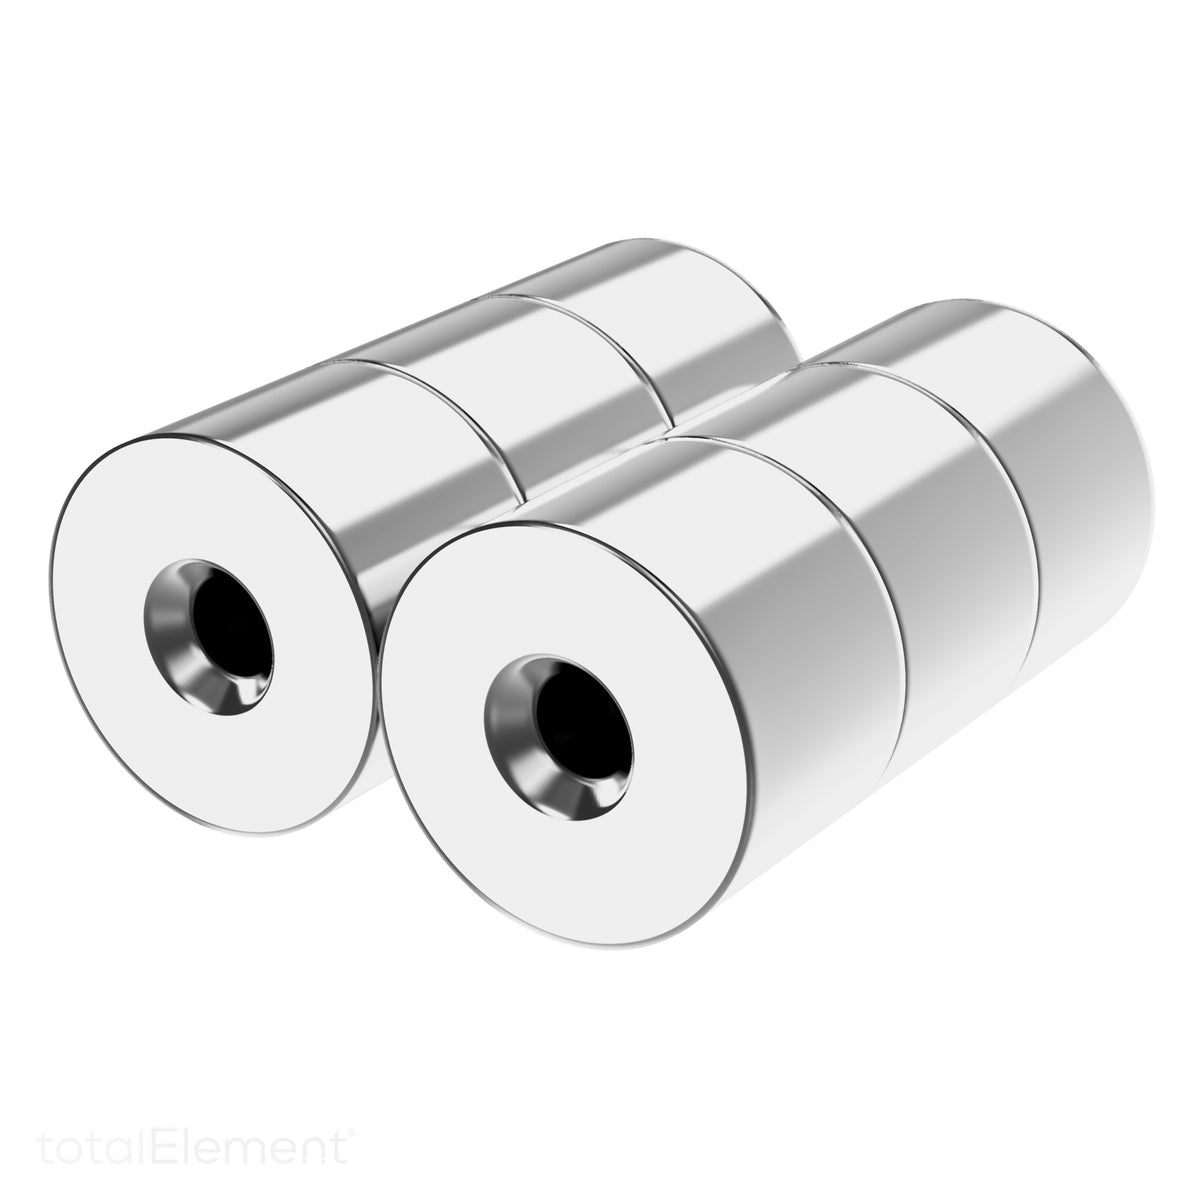 N35 Neodymium magnet countersunk ring : 12mm OD x 8mm large ID x 4mm small  ID x 4mm T - Supreme Magnets — The Quaint Magnet Shop